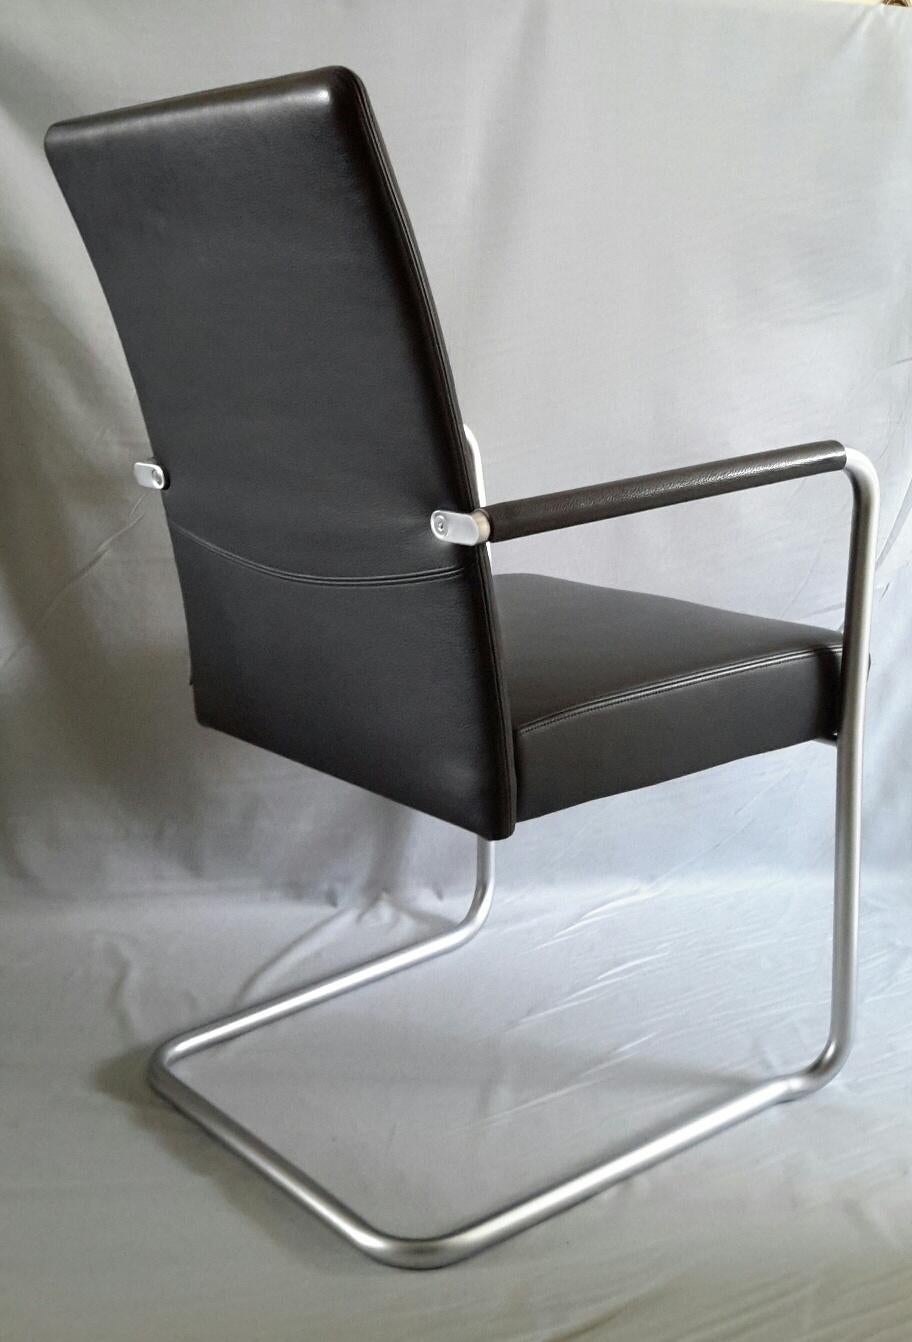 Four Walter Knoll armchairs line Jason (1997) design by the Austrian studio EOOS, in black grained leather with anodized aluminum structure.
The armchairs are in like new- condition.
Attention priced by 1. Total 4 armchairs available. Sold by 1,